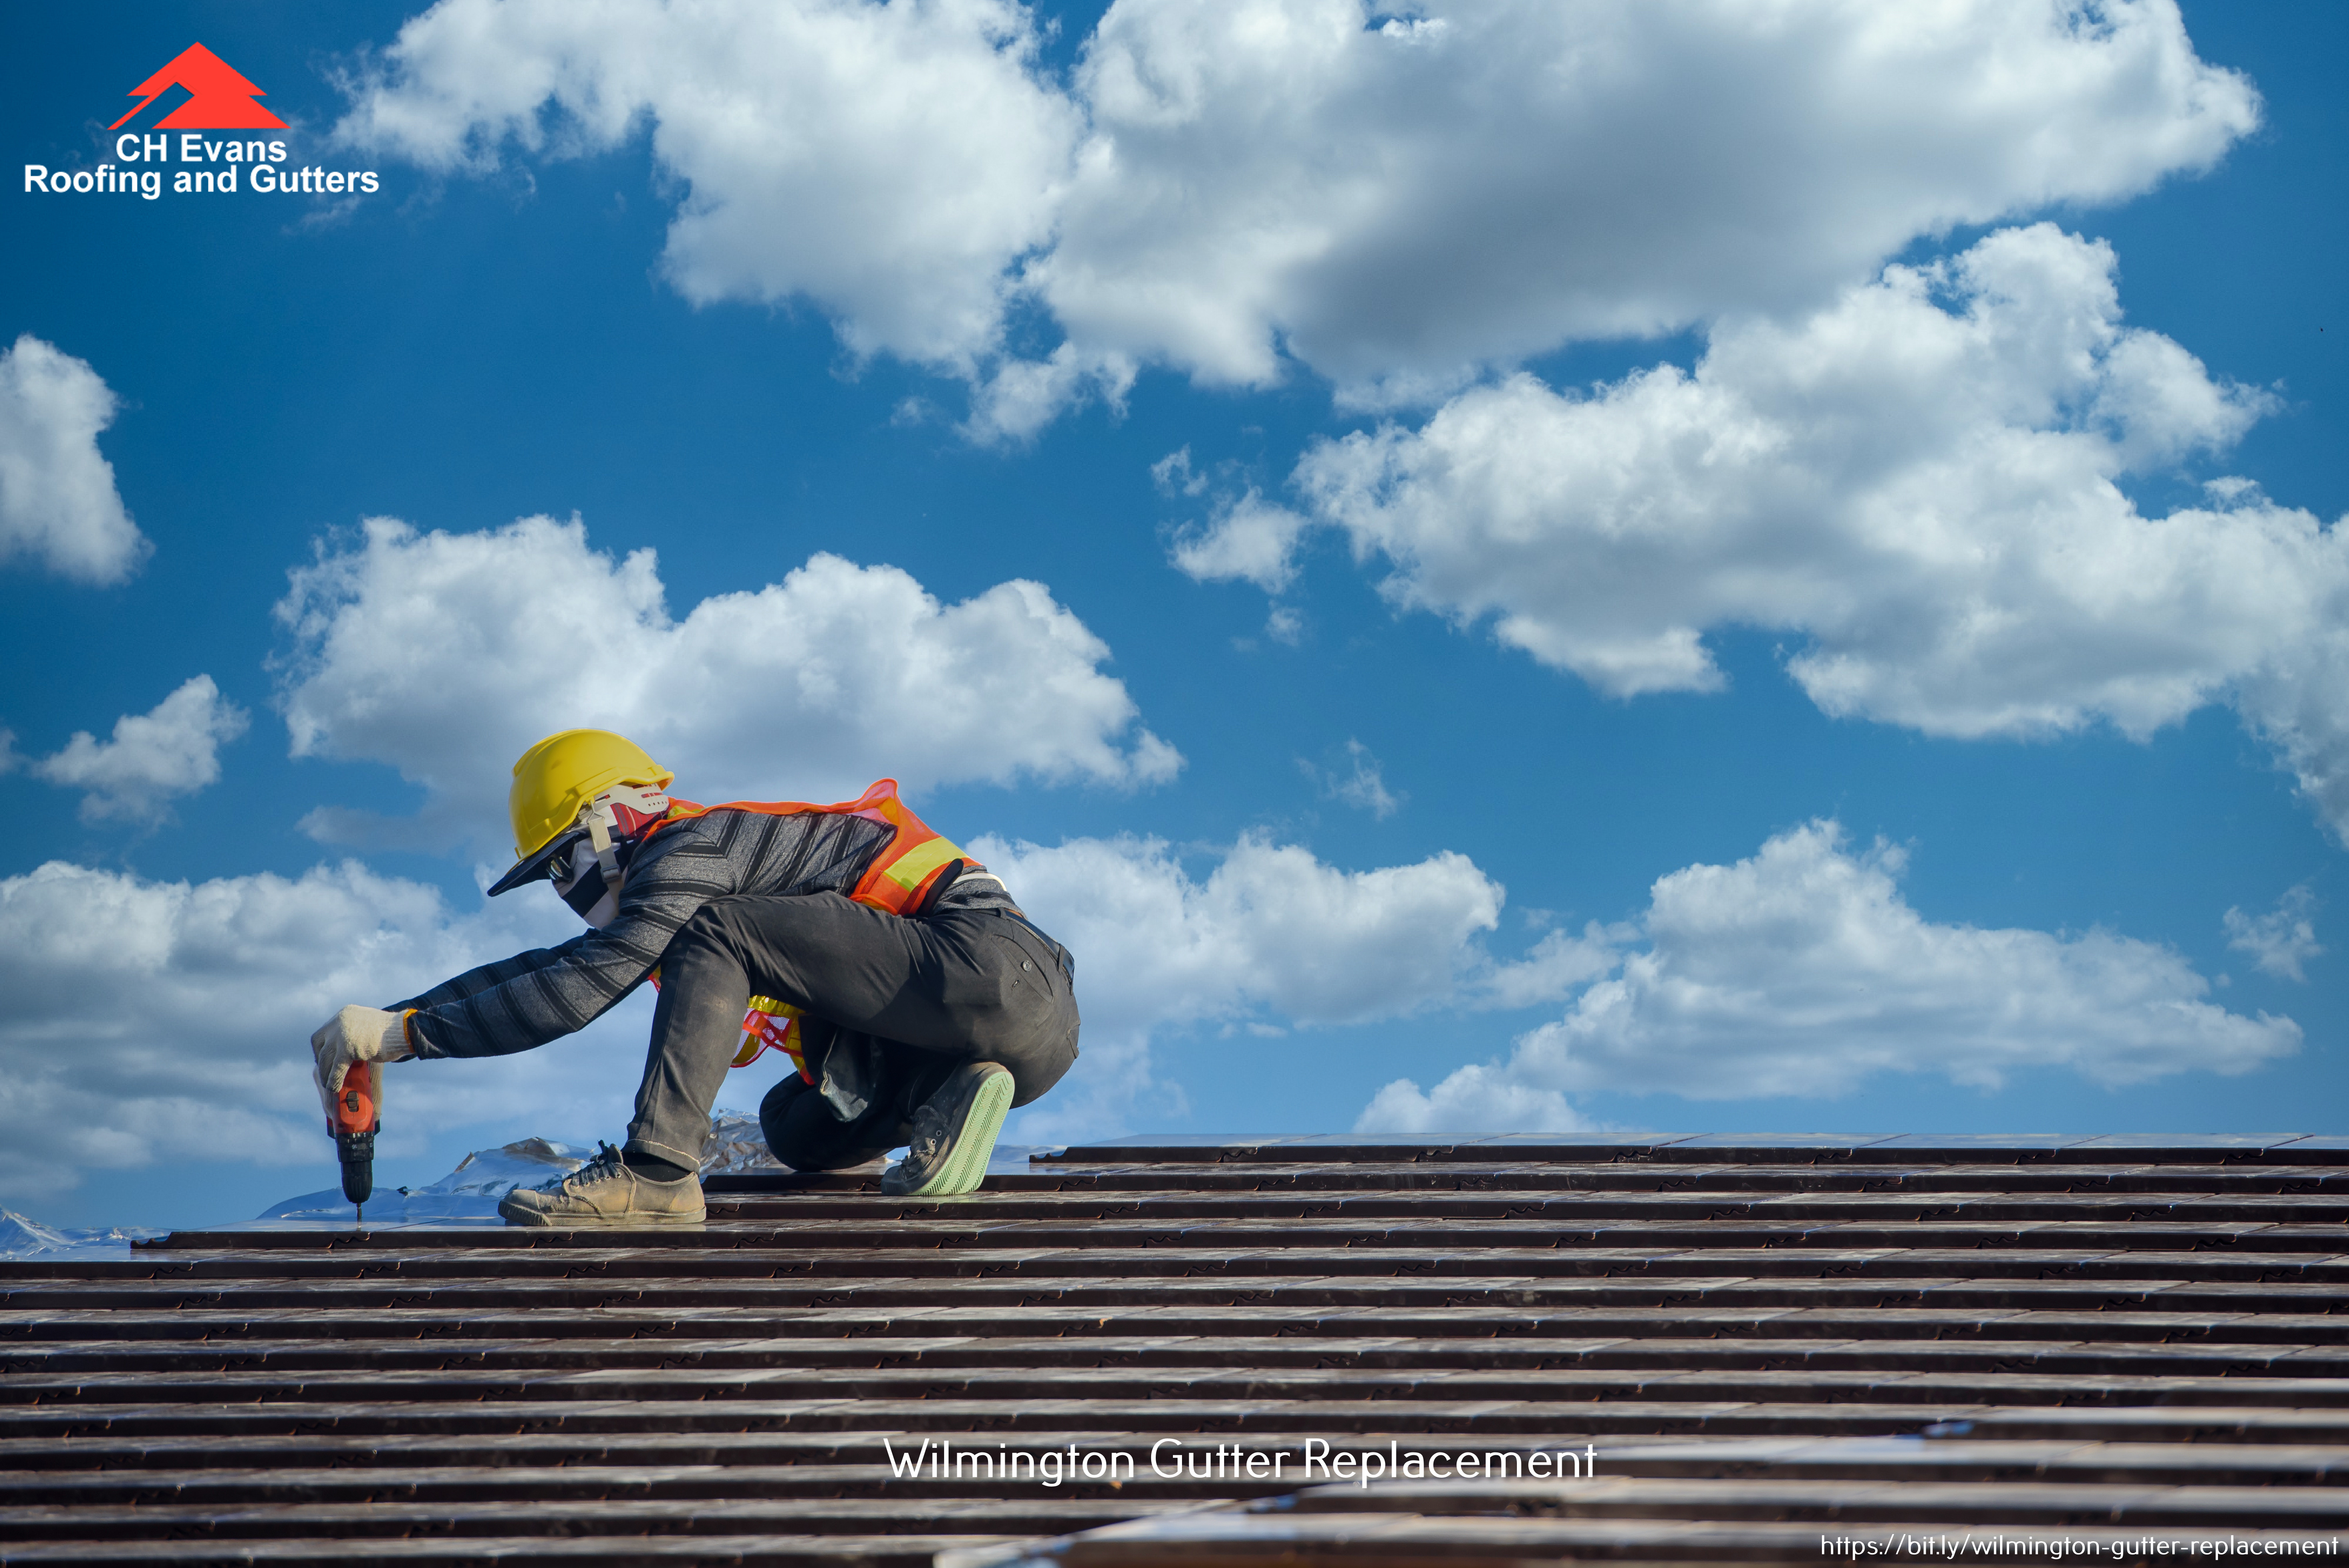 C H Evans Roofing and Gutters Wilmington Highlights the Benefits of Hiring Certified Roofers